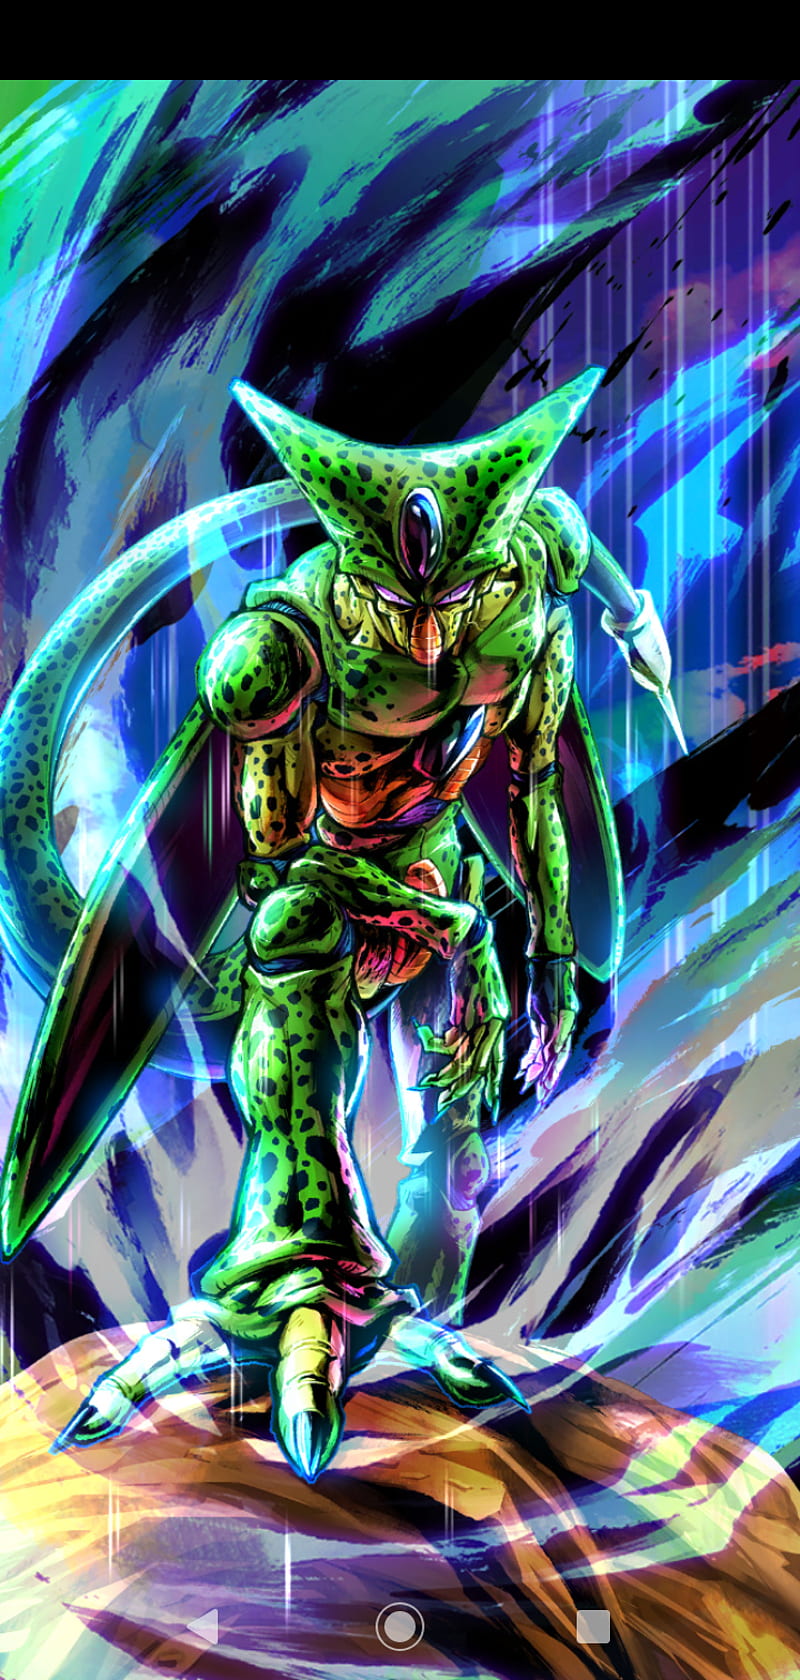 100+] Perfect Cell Wallpapers | Wallpapers.com